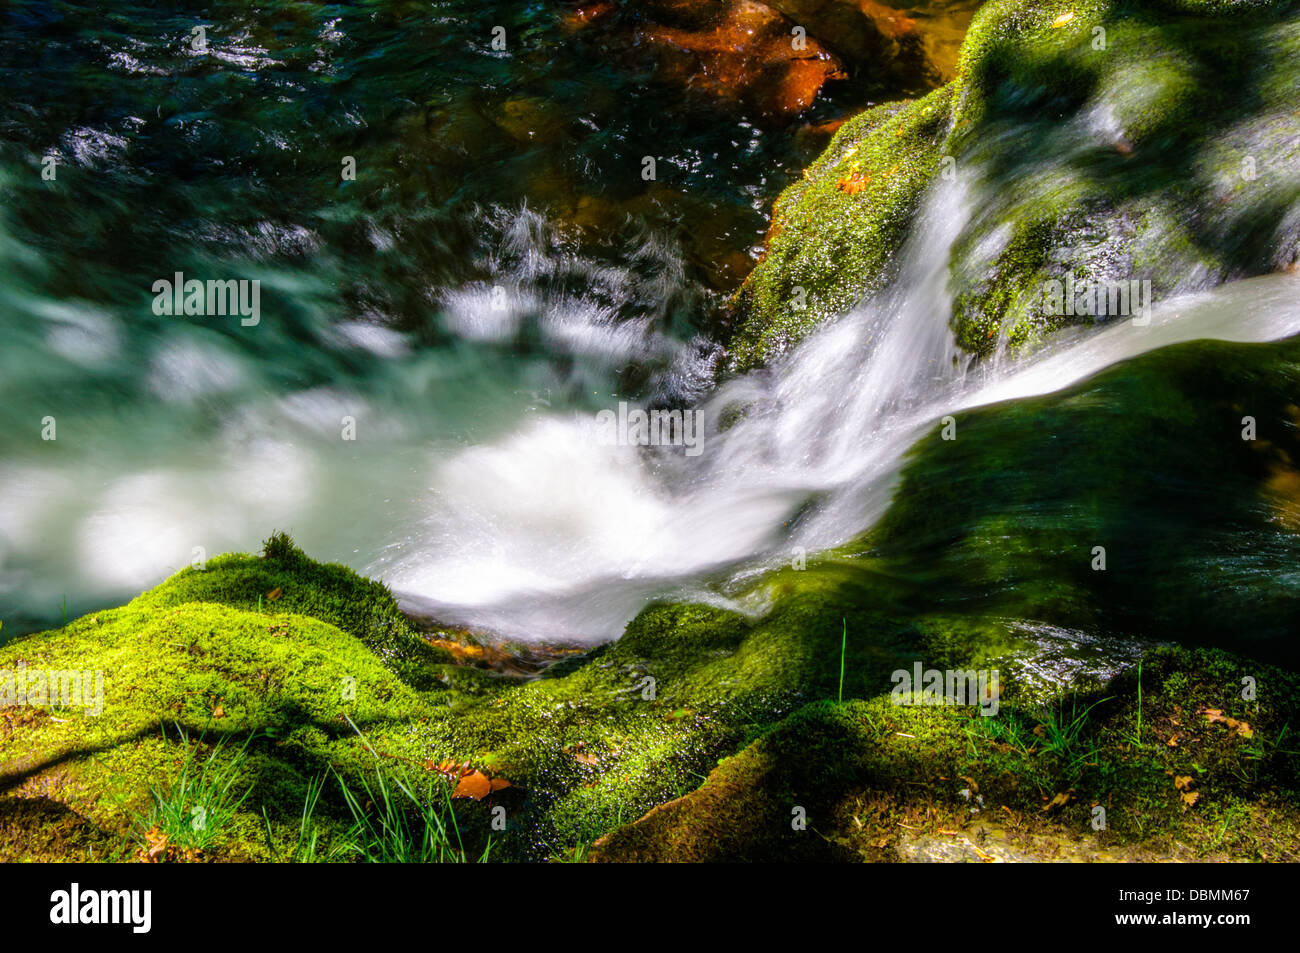 Crystal clear water flowing over green mossy rocks Stock Photo